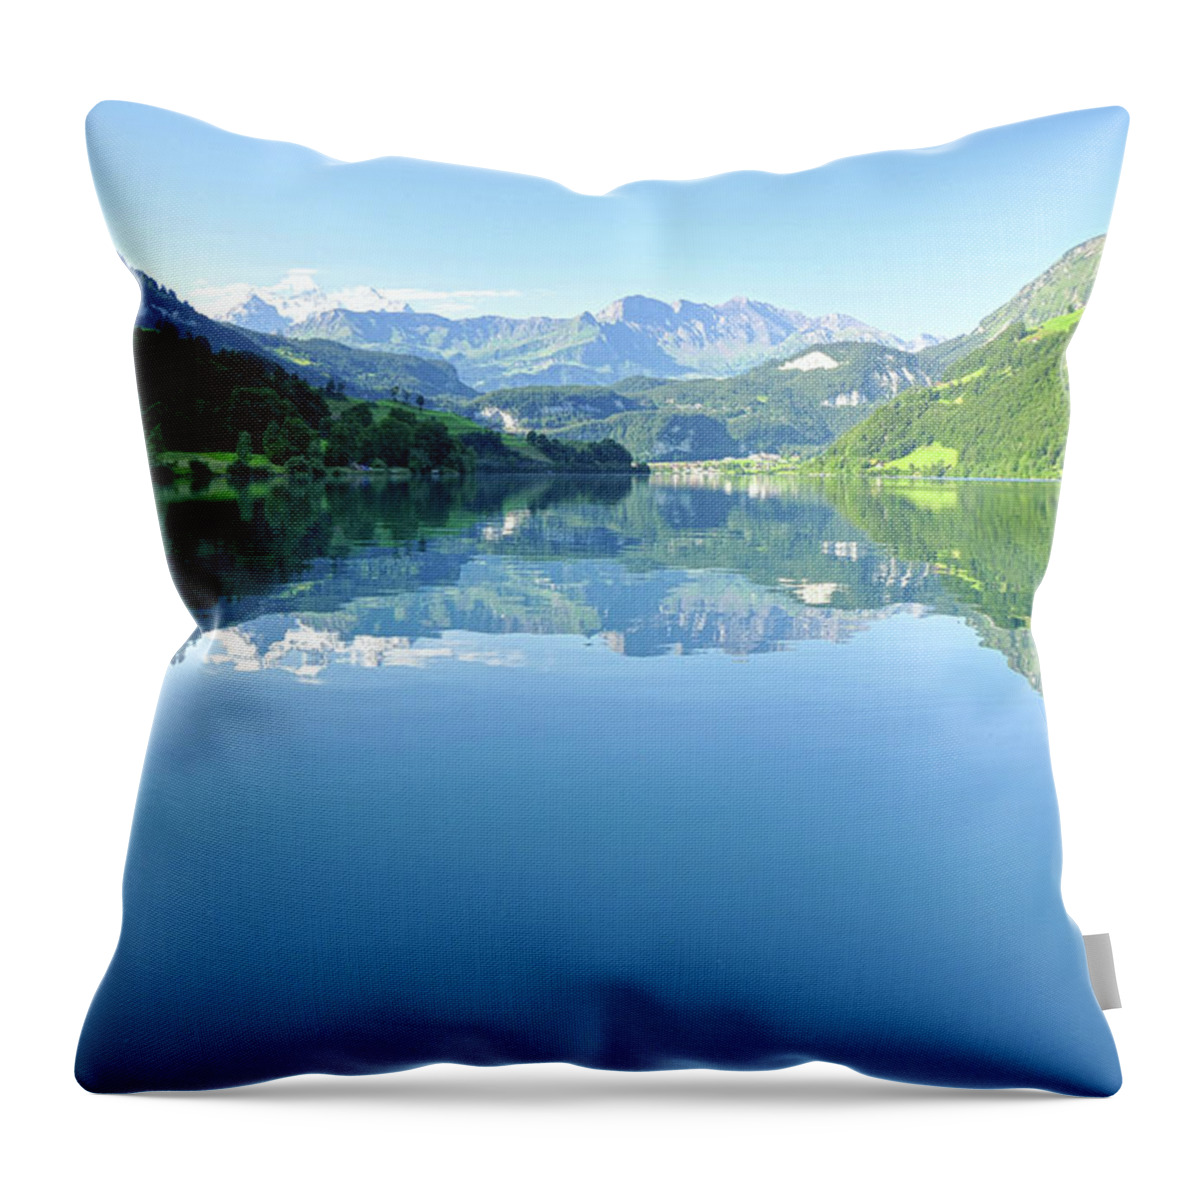 Scenics Throw Pillow featuring the photograph Lake Lungern by Ceca Photography